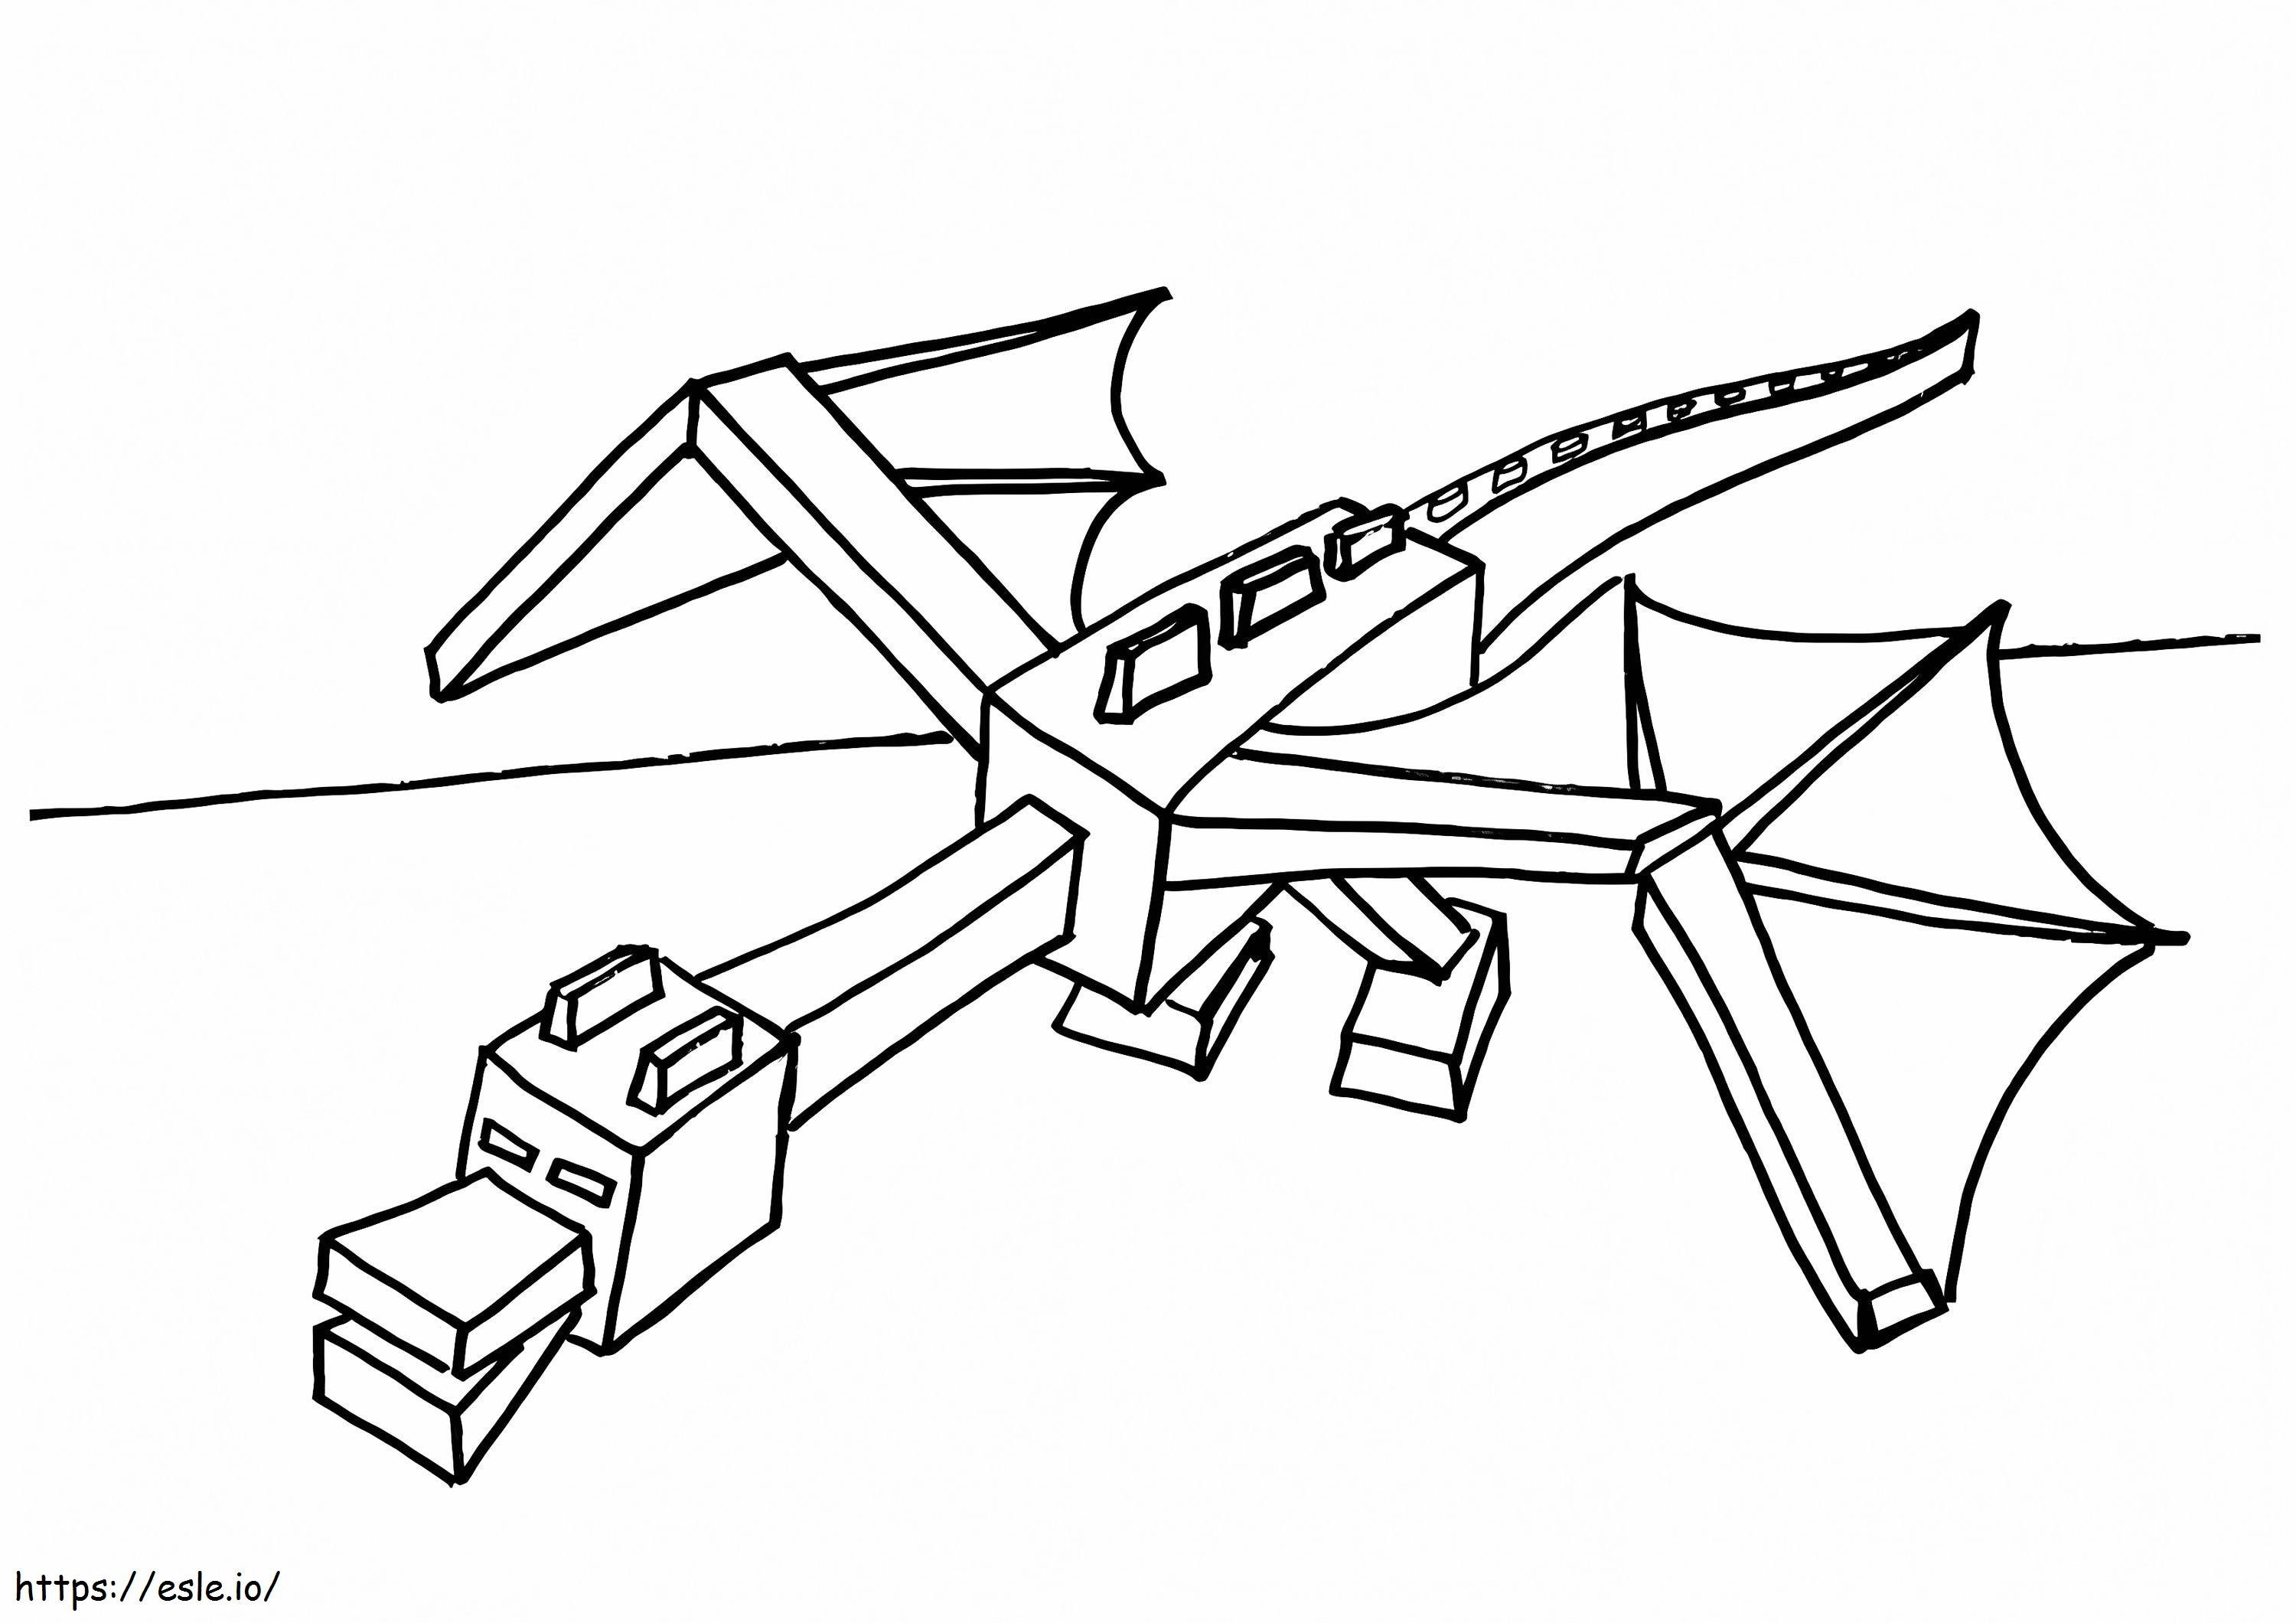 Dragon Ends coloring page